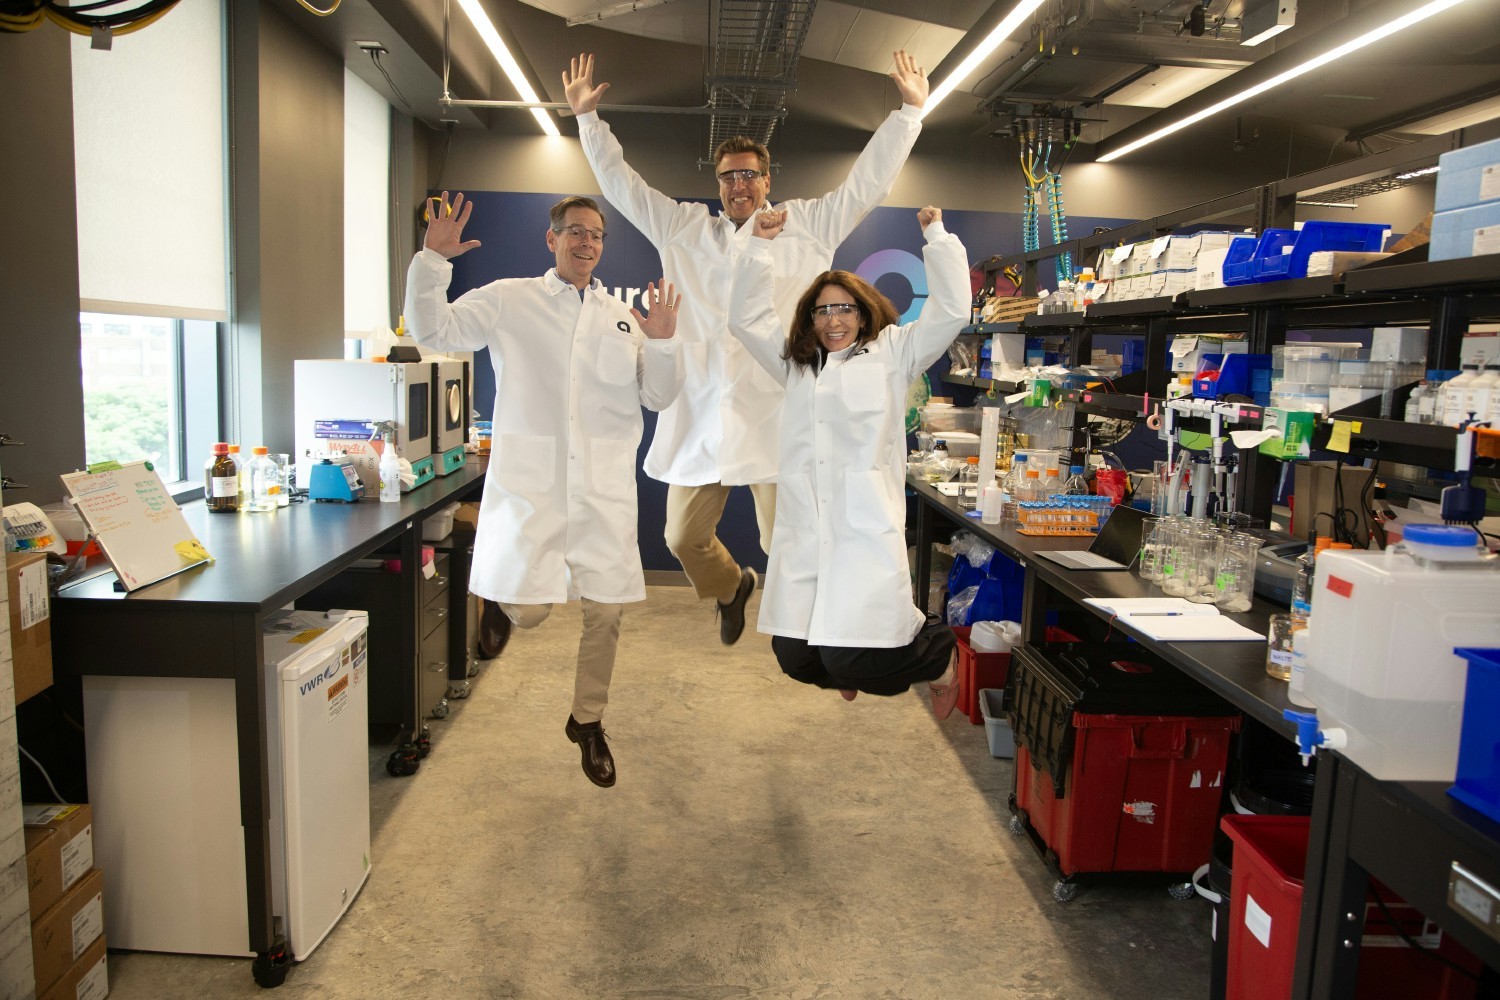 Our CEO, CTO and CCO jumping for joy at our success in removing PFAS from contaminated water sources!